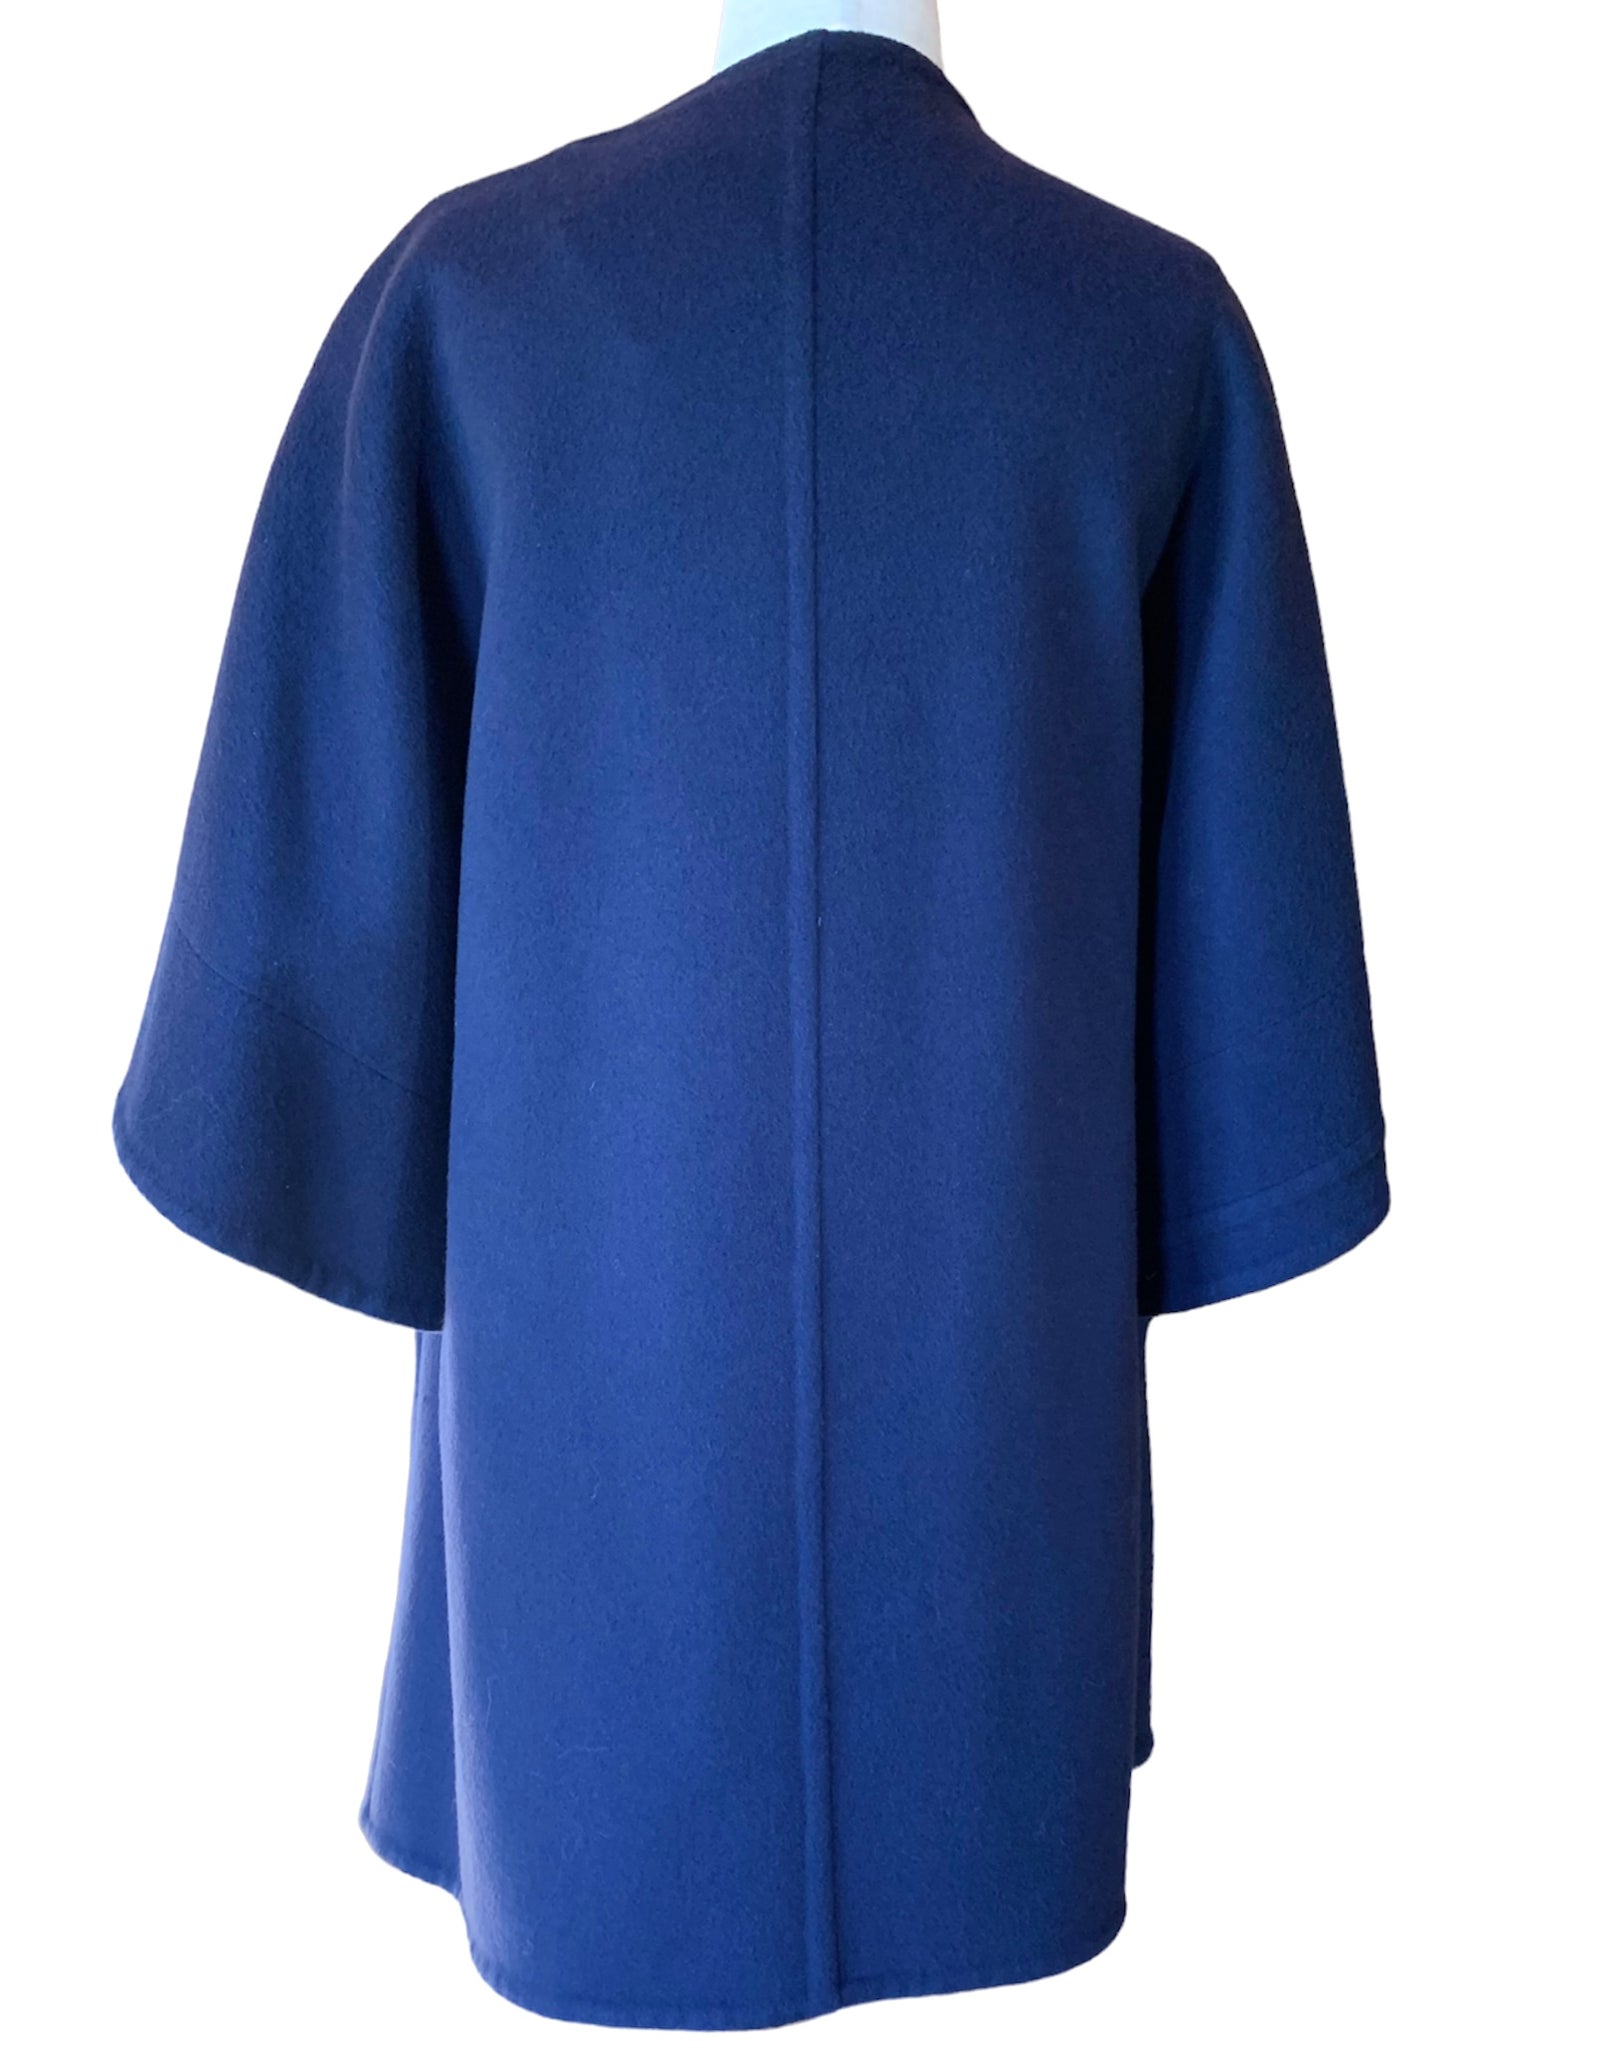 LOUIS VUITTON THICK CASHMERE JACKET CAPE PONCHO WITH LEATHER BELT